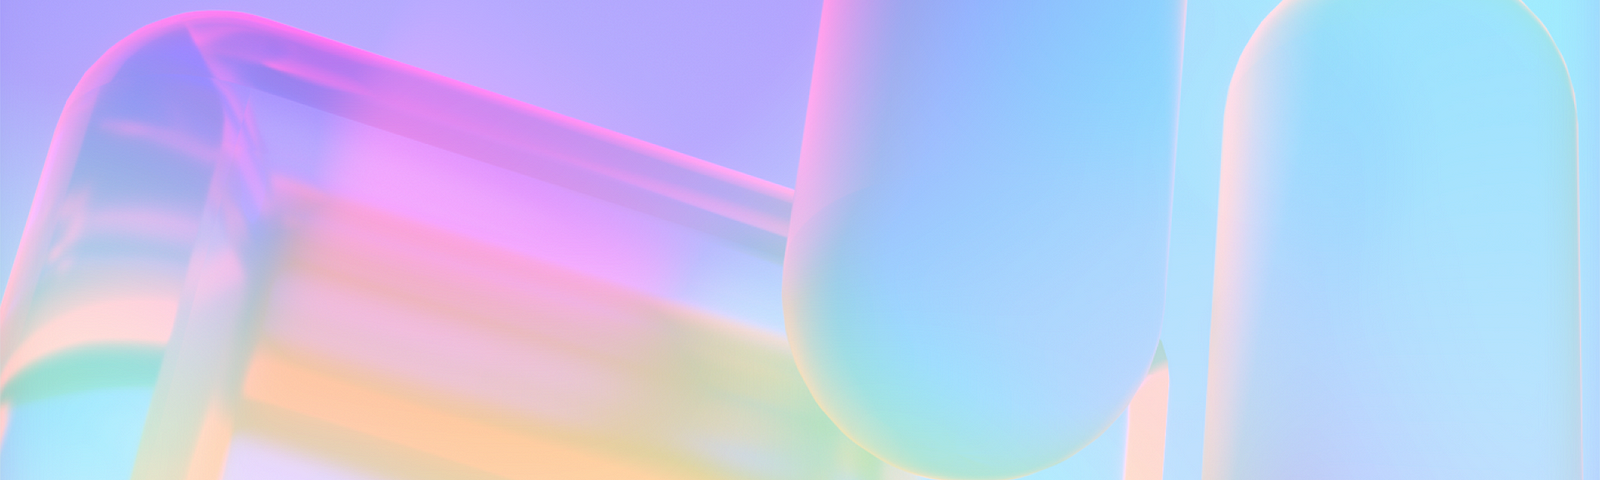 An abstract image of transluscent 3D UI elements such as buttons and device frames in hues of purple, pink, blue, and orange